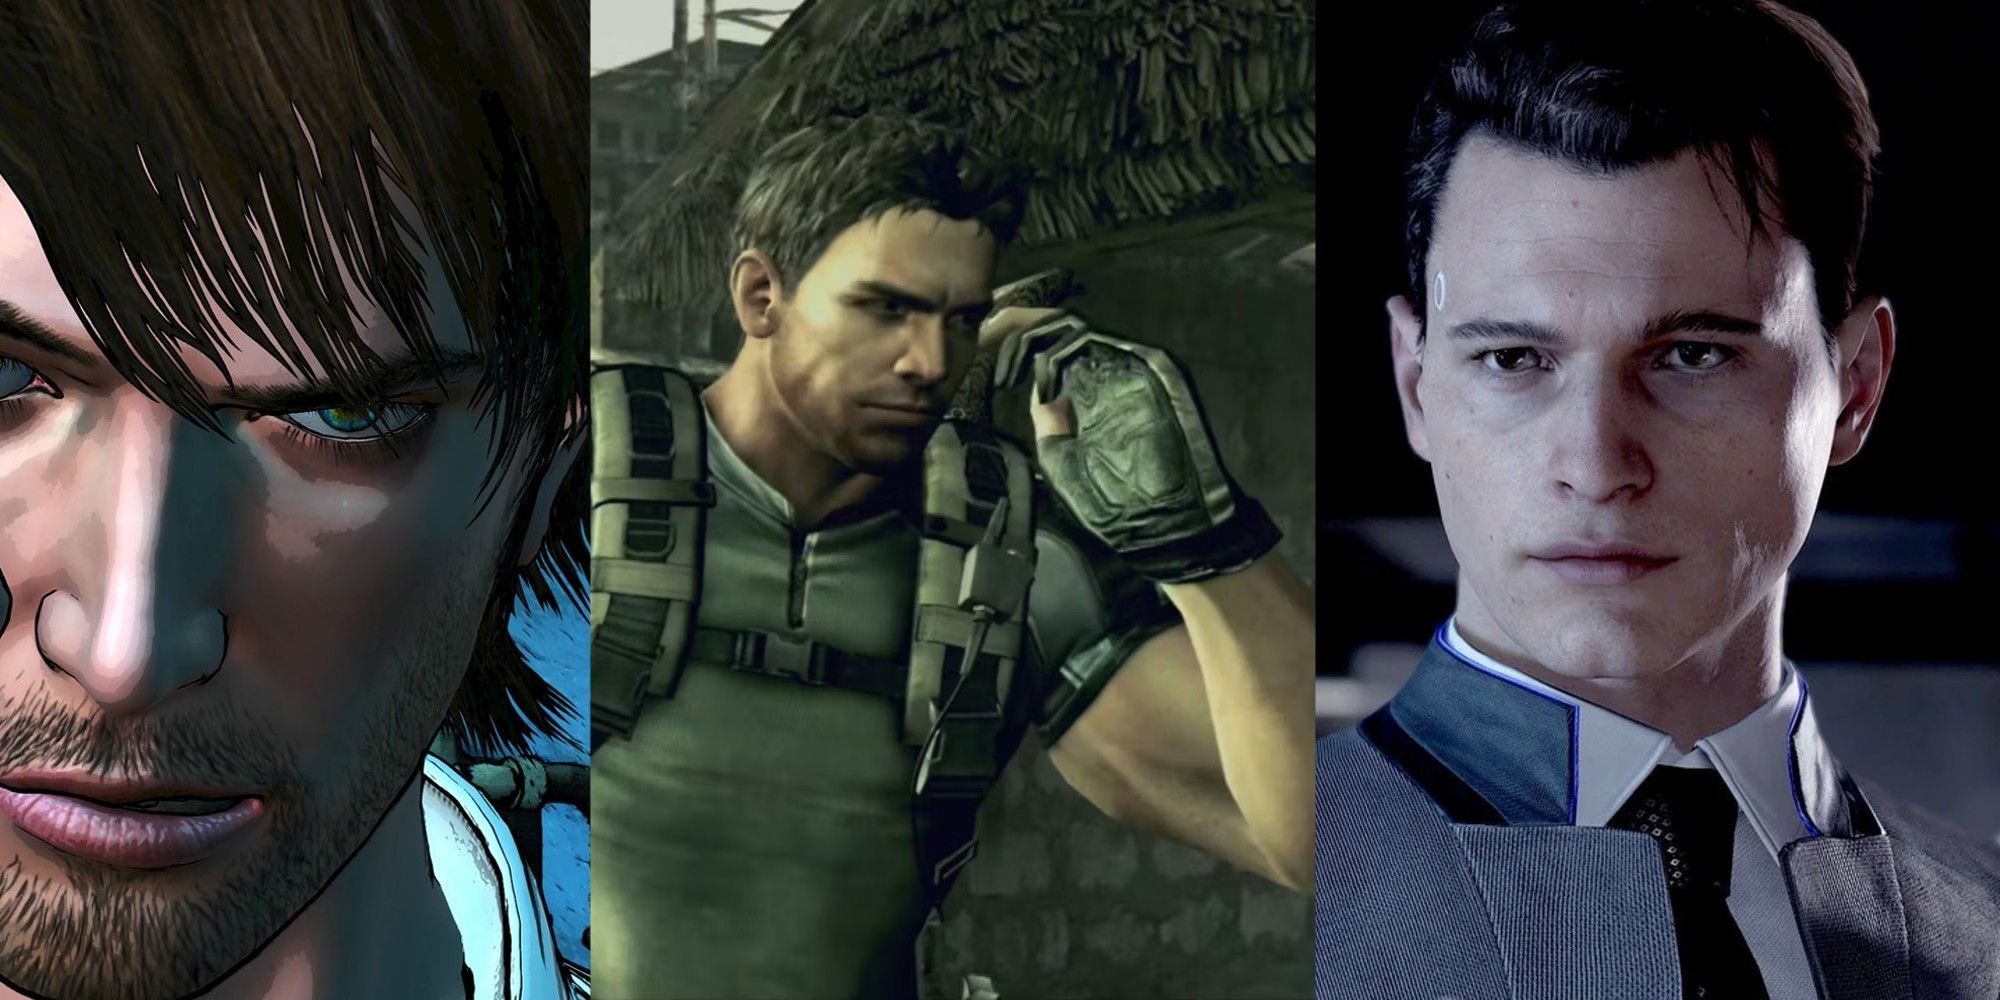 David Young, Chris Redfield, And Connor